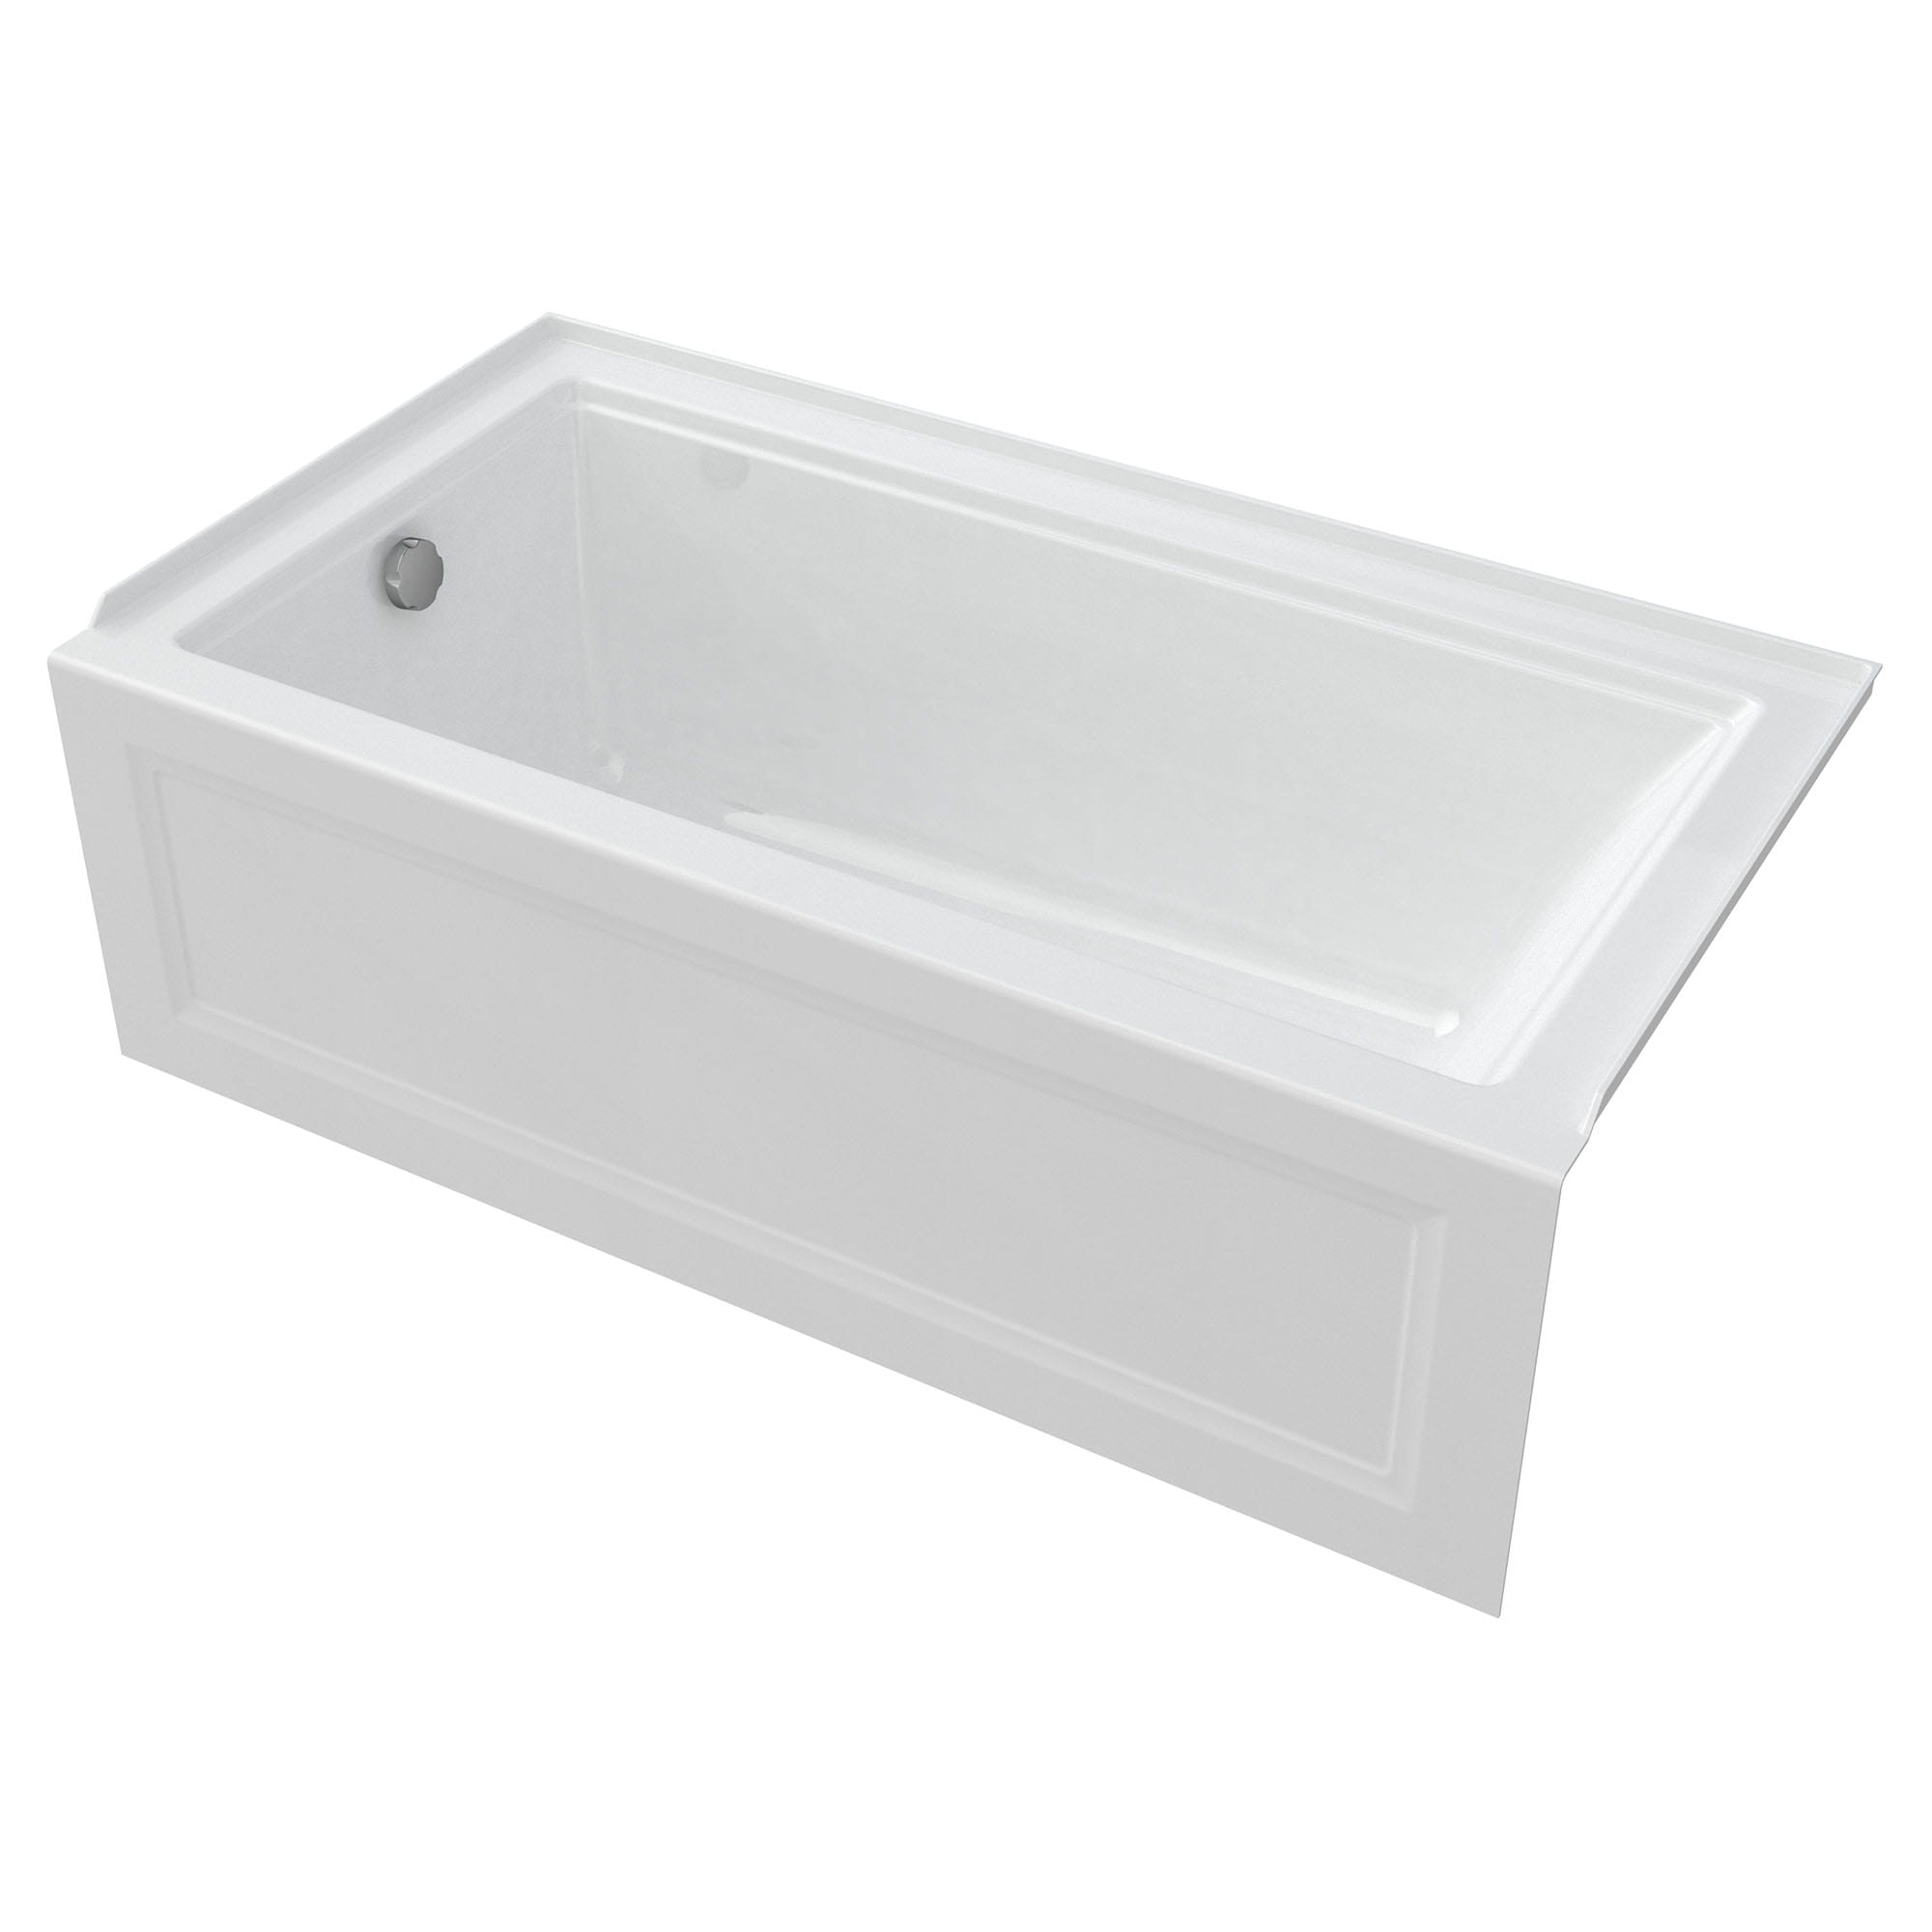 Town Square S 60 x 32 Inch Integral Apron Bathtub With Left Hand Outlet WHITE